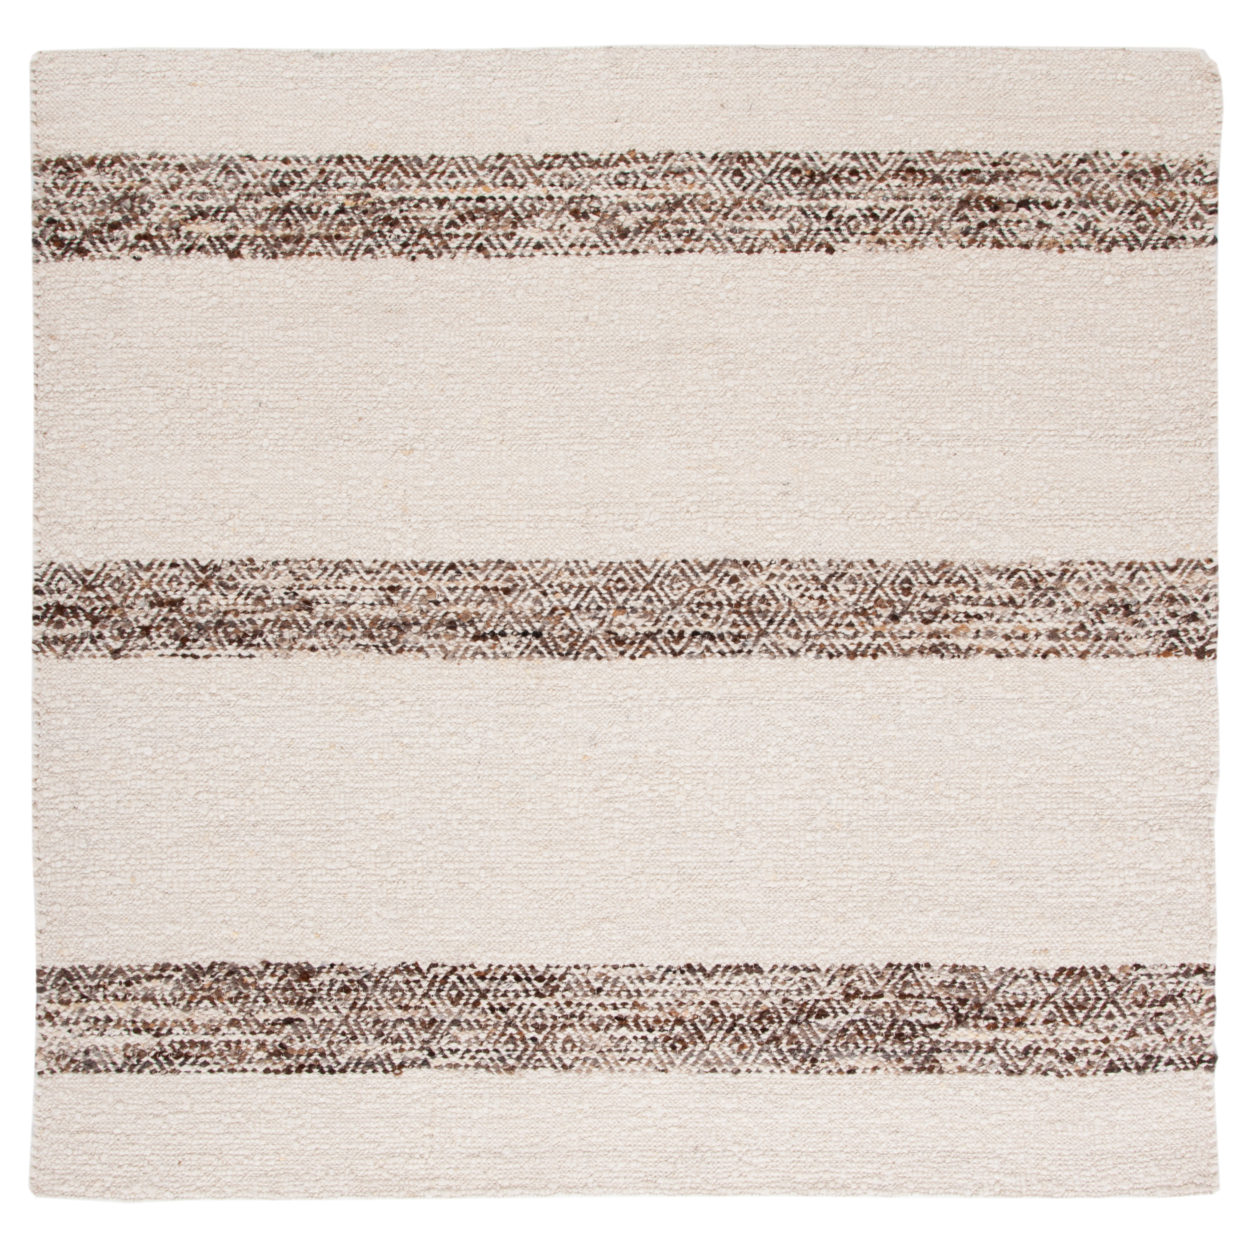 SAFAVIEH Natura NAT321A Handwoven Ivory / Brown Rug - 6' Square